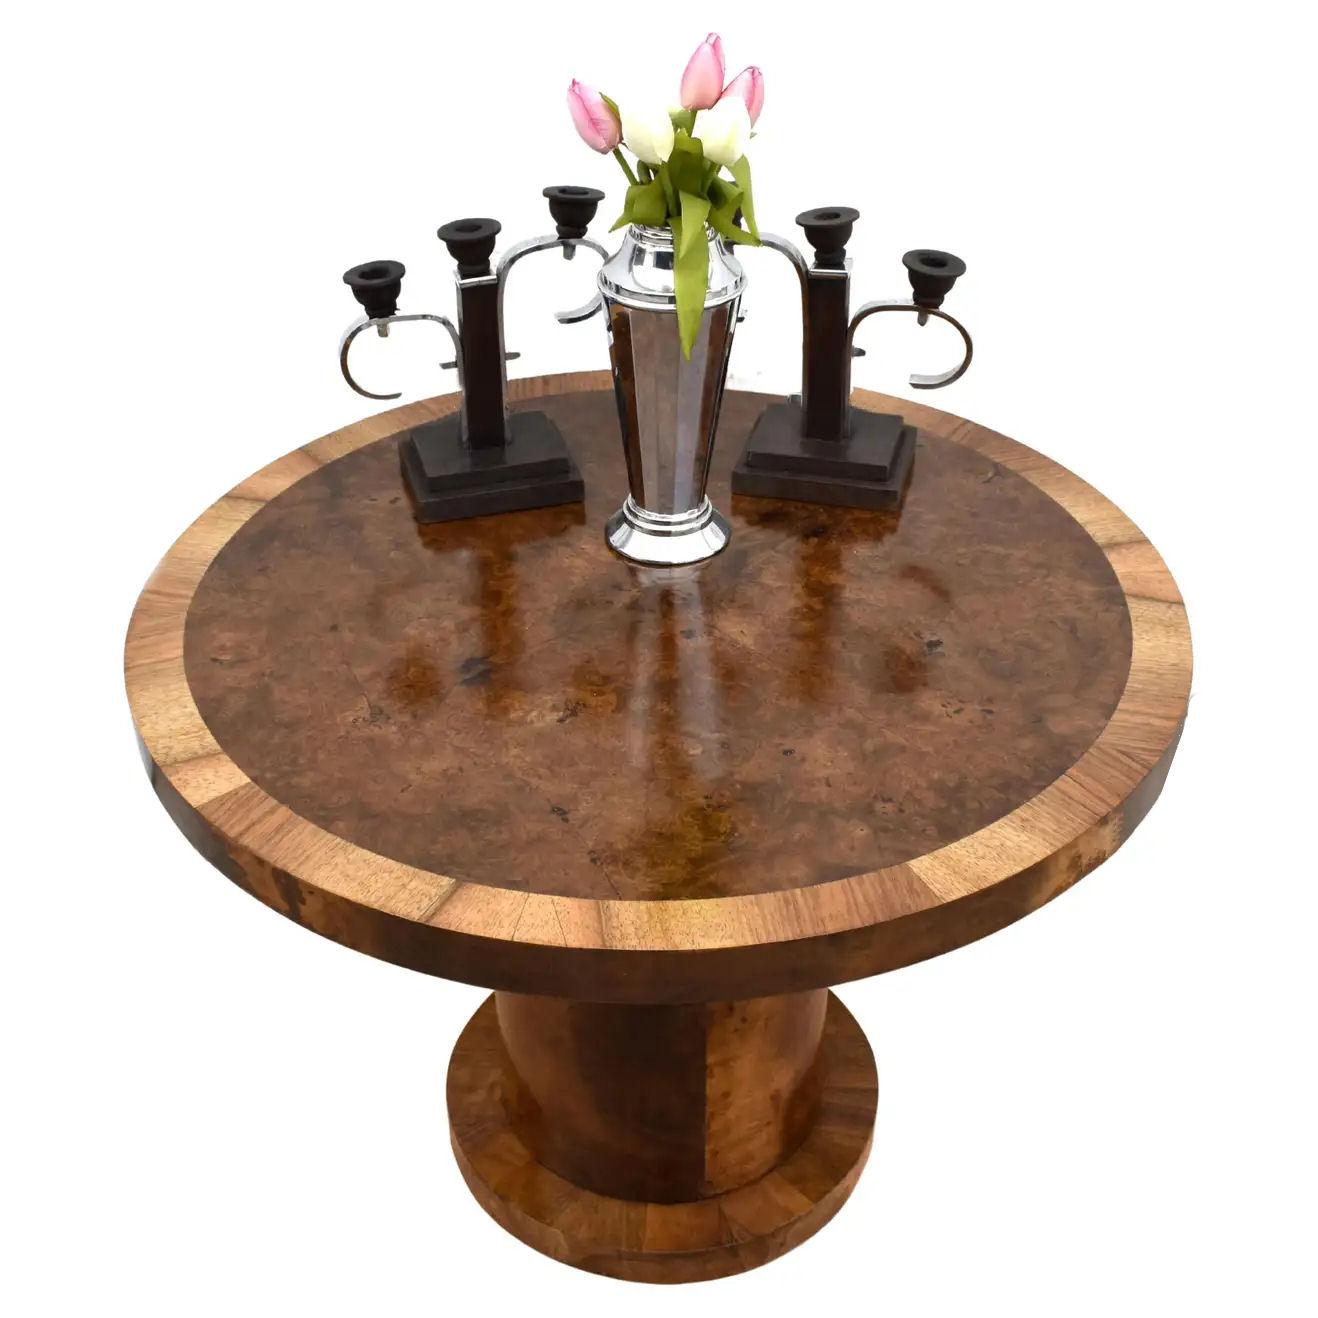 Very stylish and totally authentic English Art Deco Walnut center table dating to the 1930's. This table is beautifully shaped and fully restored to showroom condition. Typically larger than occasional coffee tables, these make ideal pieces to make